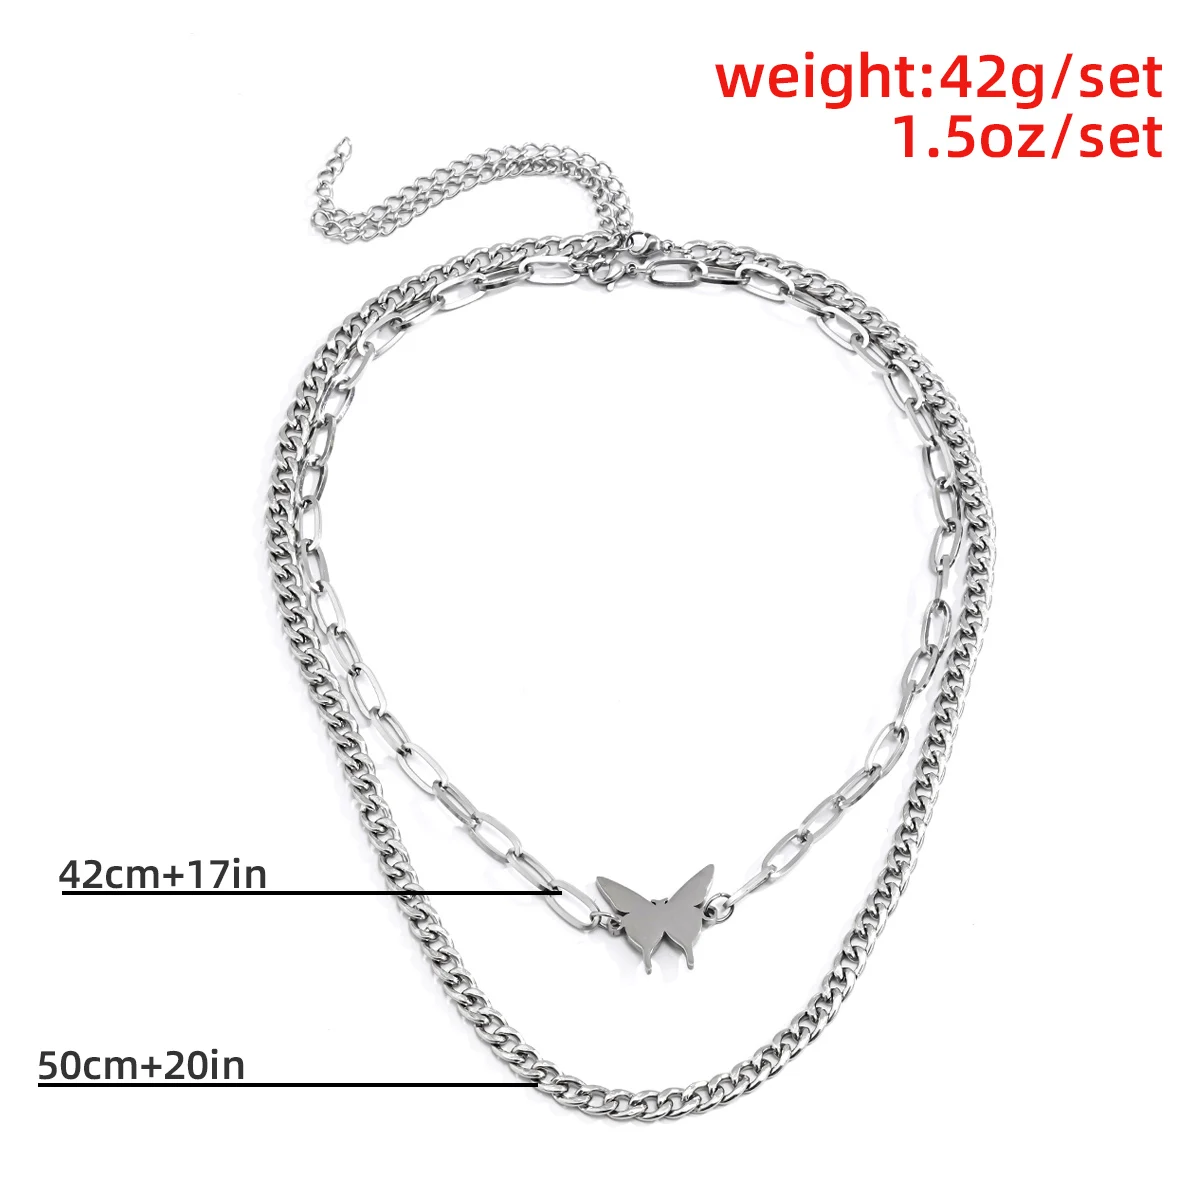 

Salircon Goth Stainless Steel Butterfly Pendant Necklace for Women Kpop Silver Color Link Chain Necklaces Punk Choker Jewelry